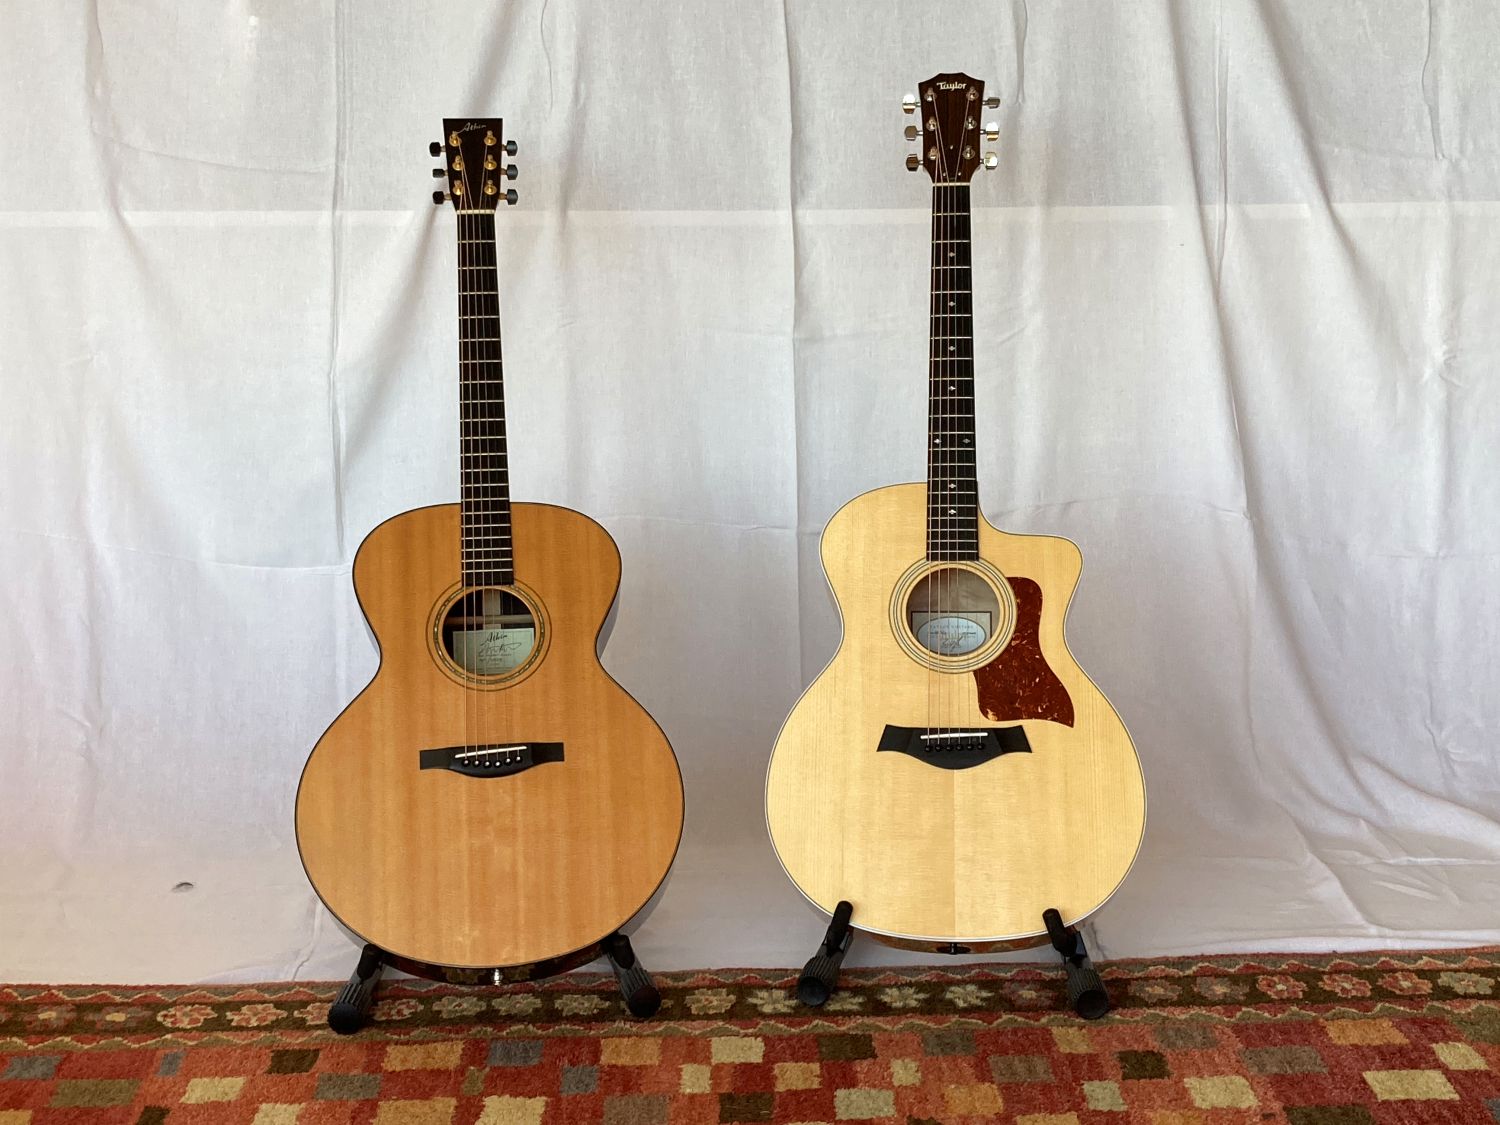 Acoustic Guitars #1 (Warm) & #2 (Bright with Cutaway Body)